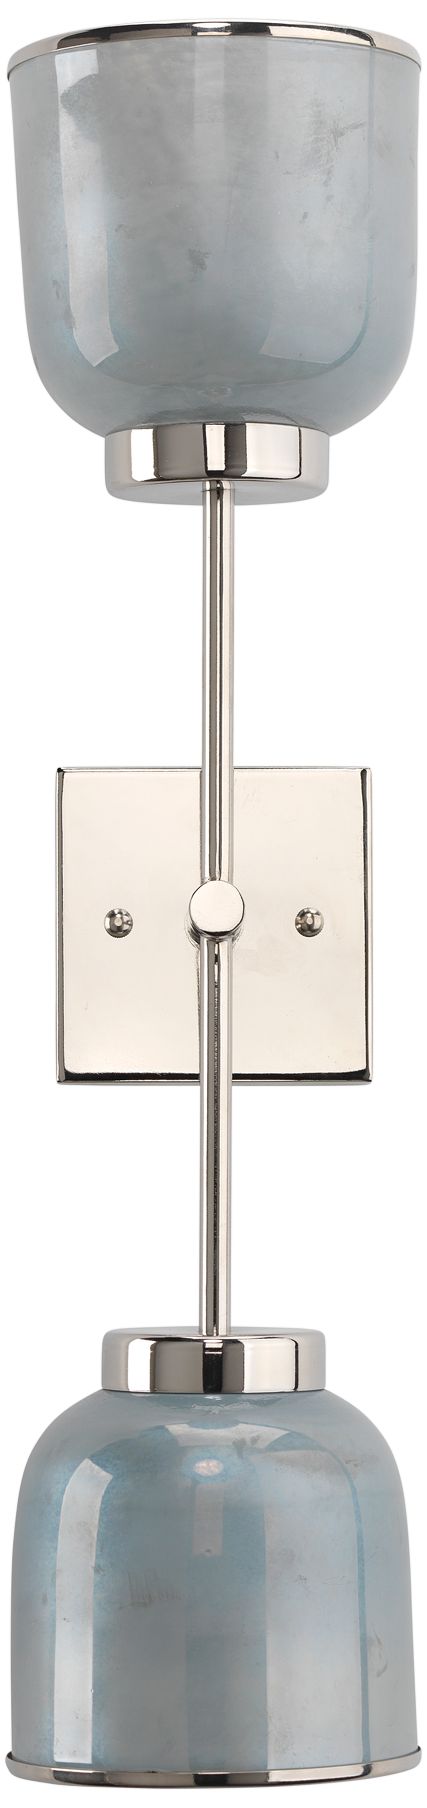 Jamie Young Vapor 24 3/4" High Opal and Nickel Double Wall Sconce